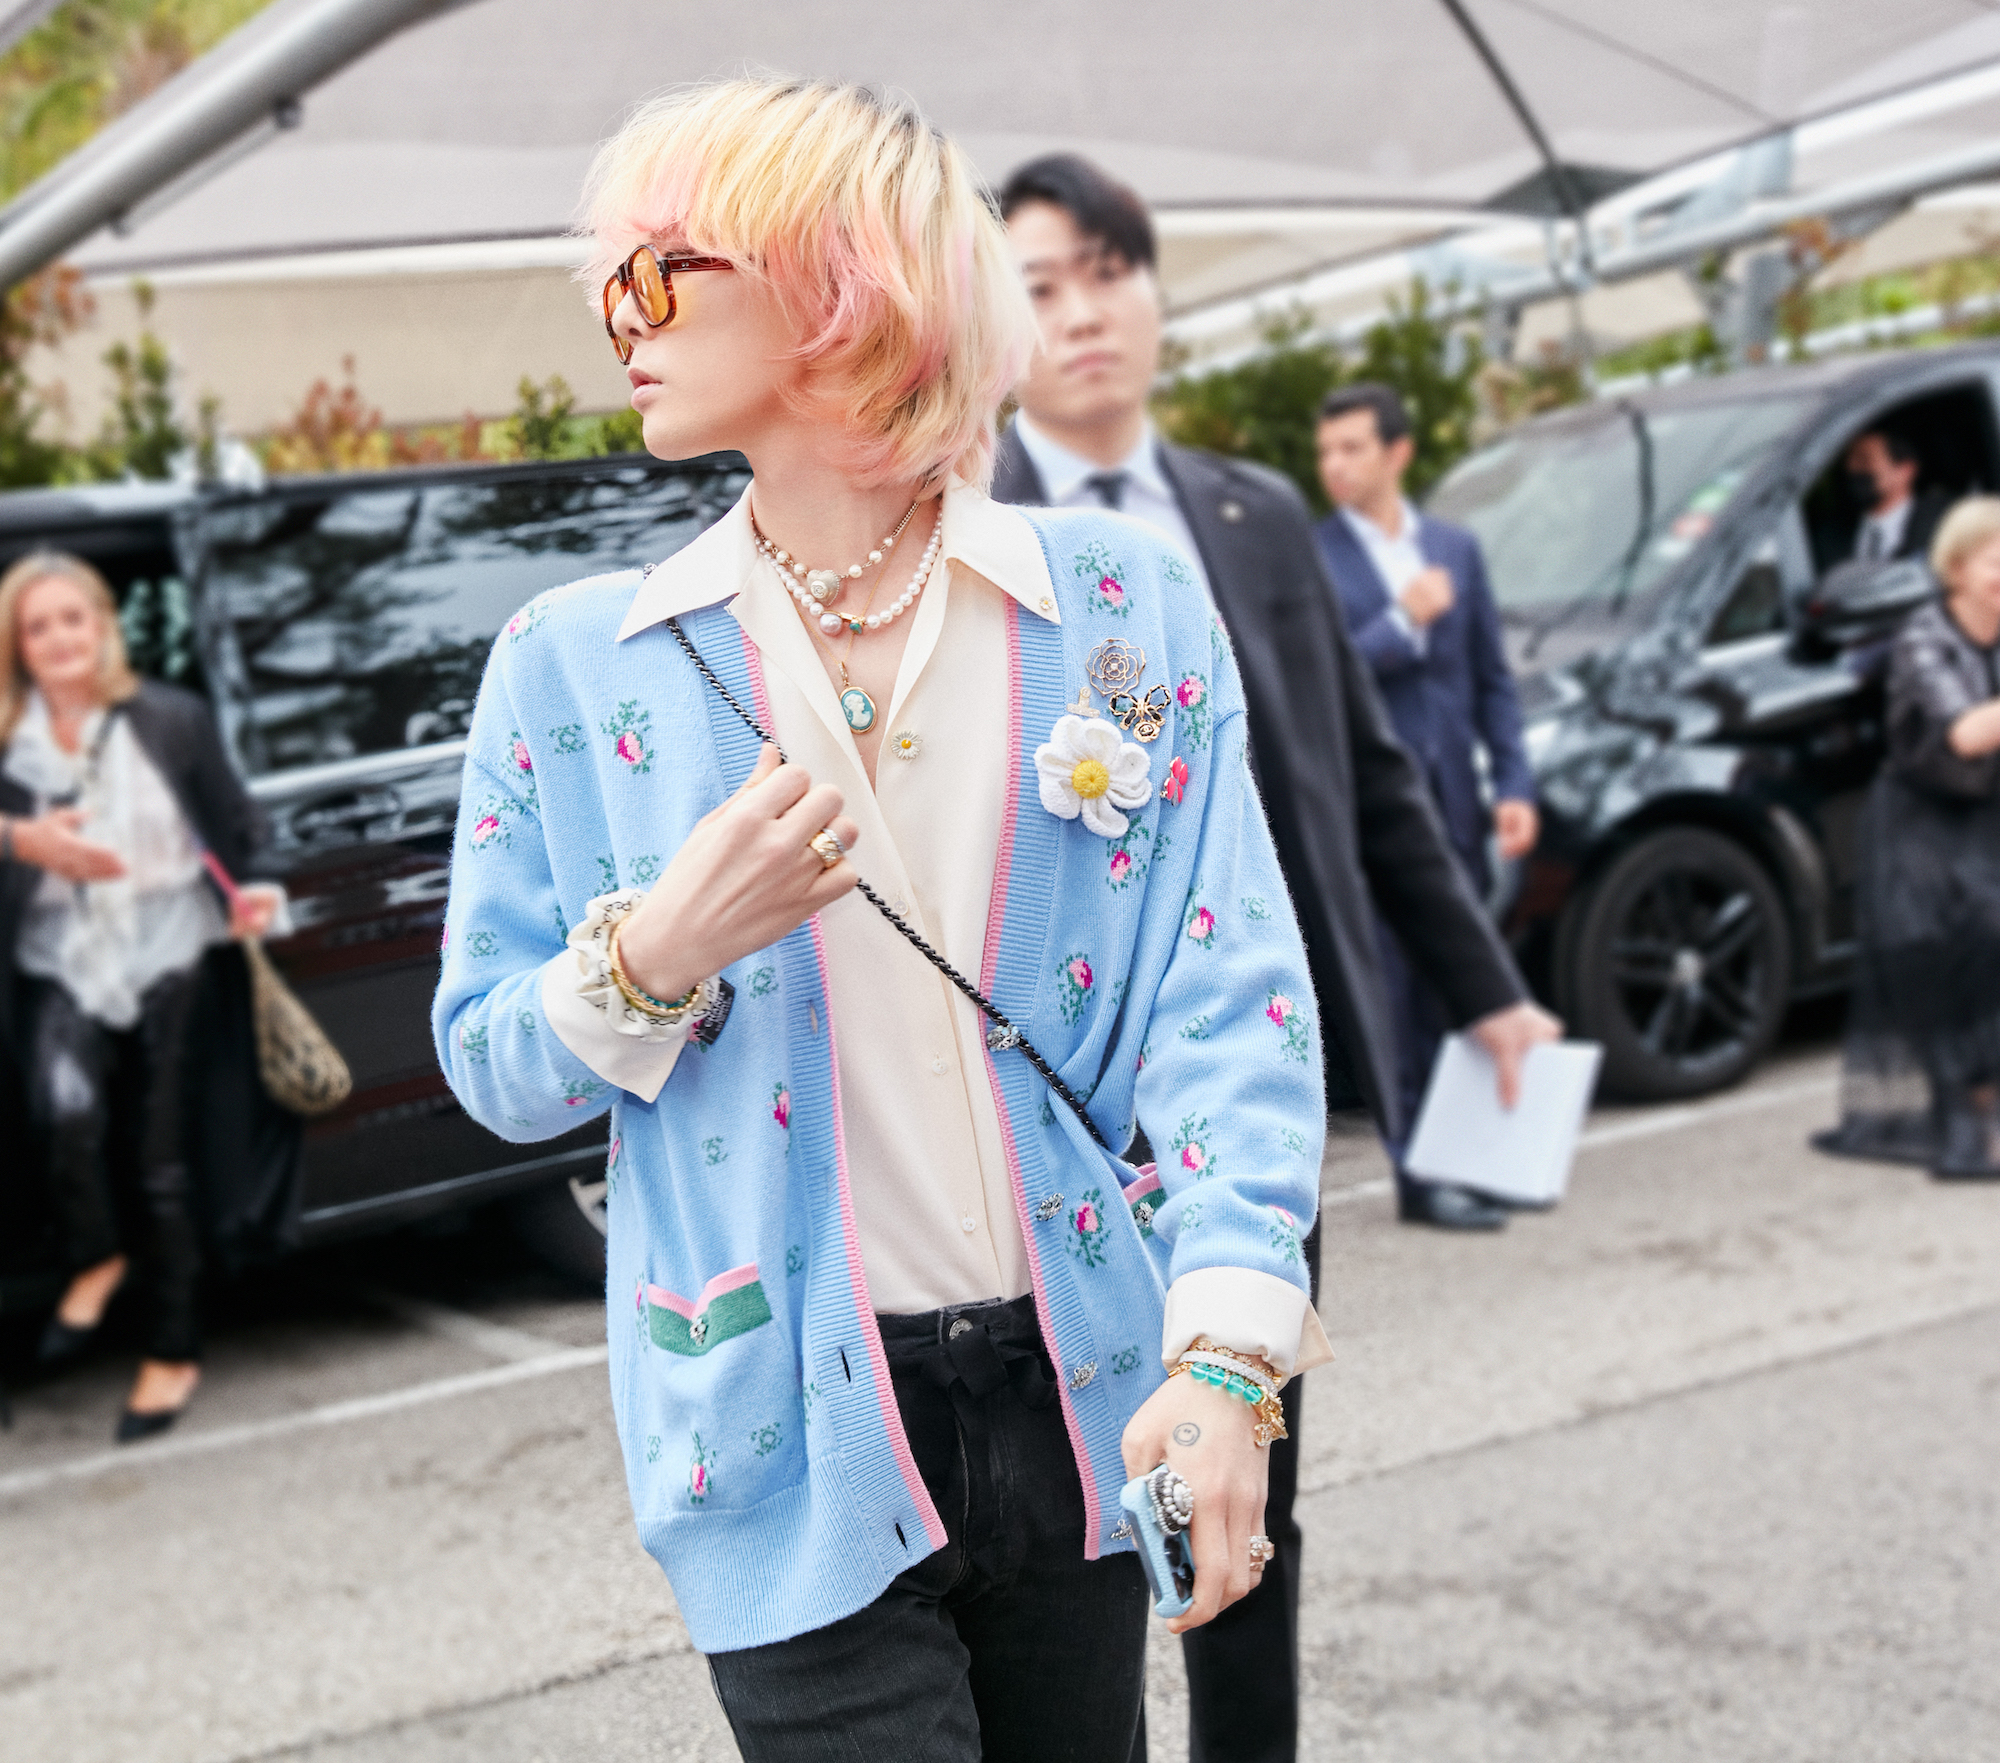 G-dragon for Chanel Cruise 2022